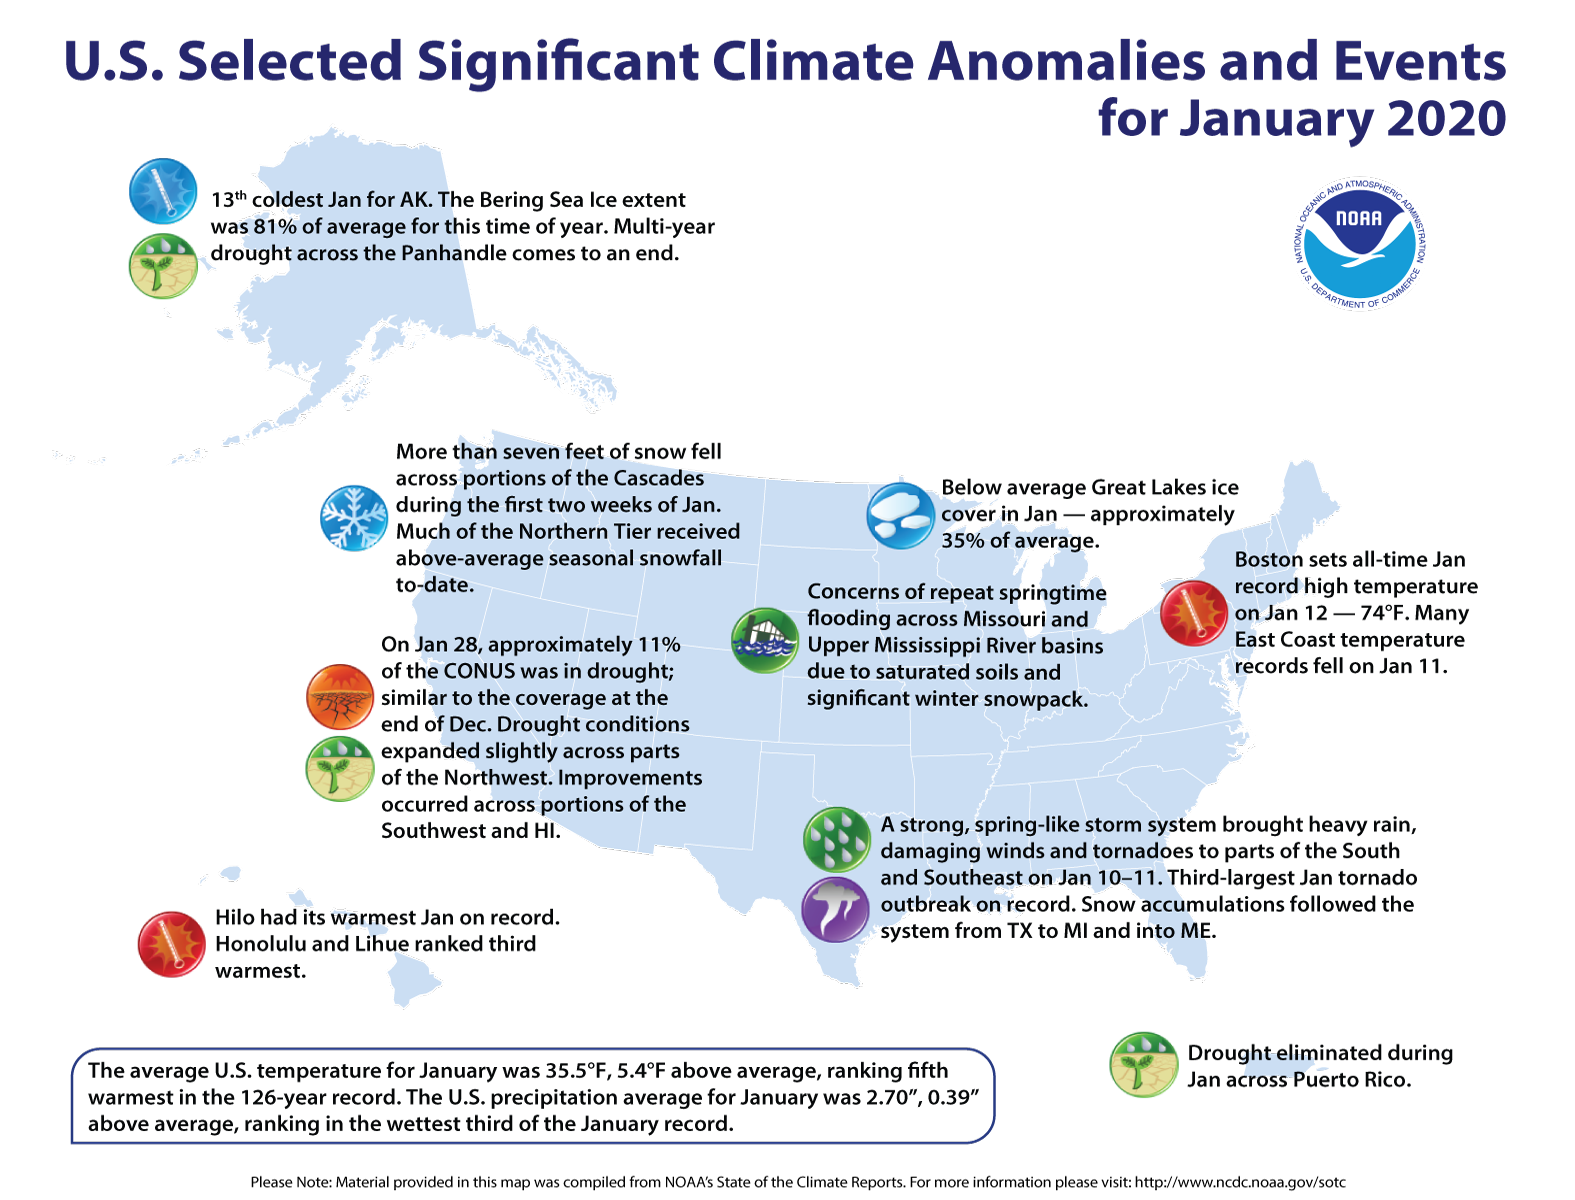 An annotated map of the United States showing notable climate and weather events that occurred across the country during January 2020. For details, please visit http://bit.ly/USClimate202001.